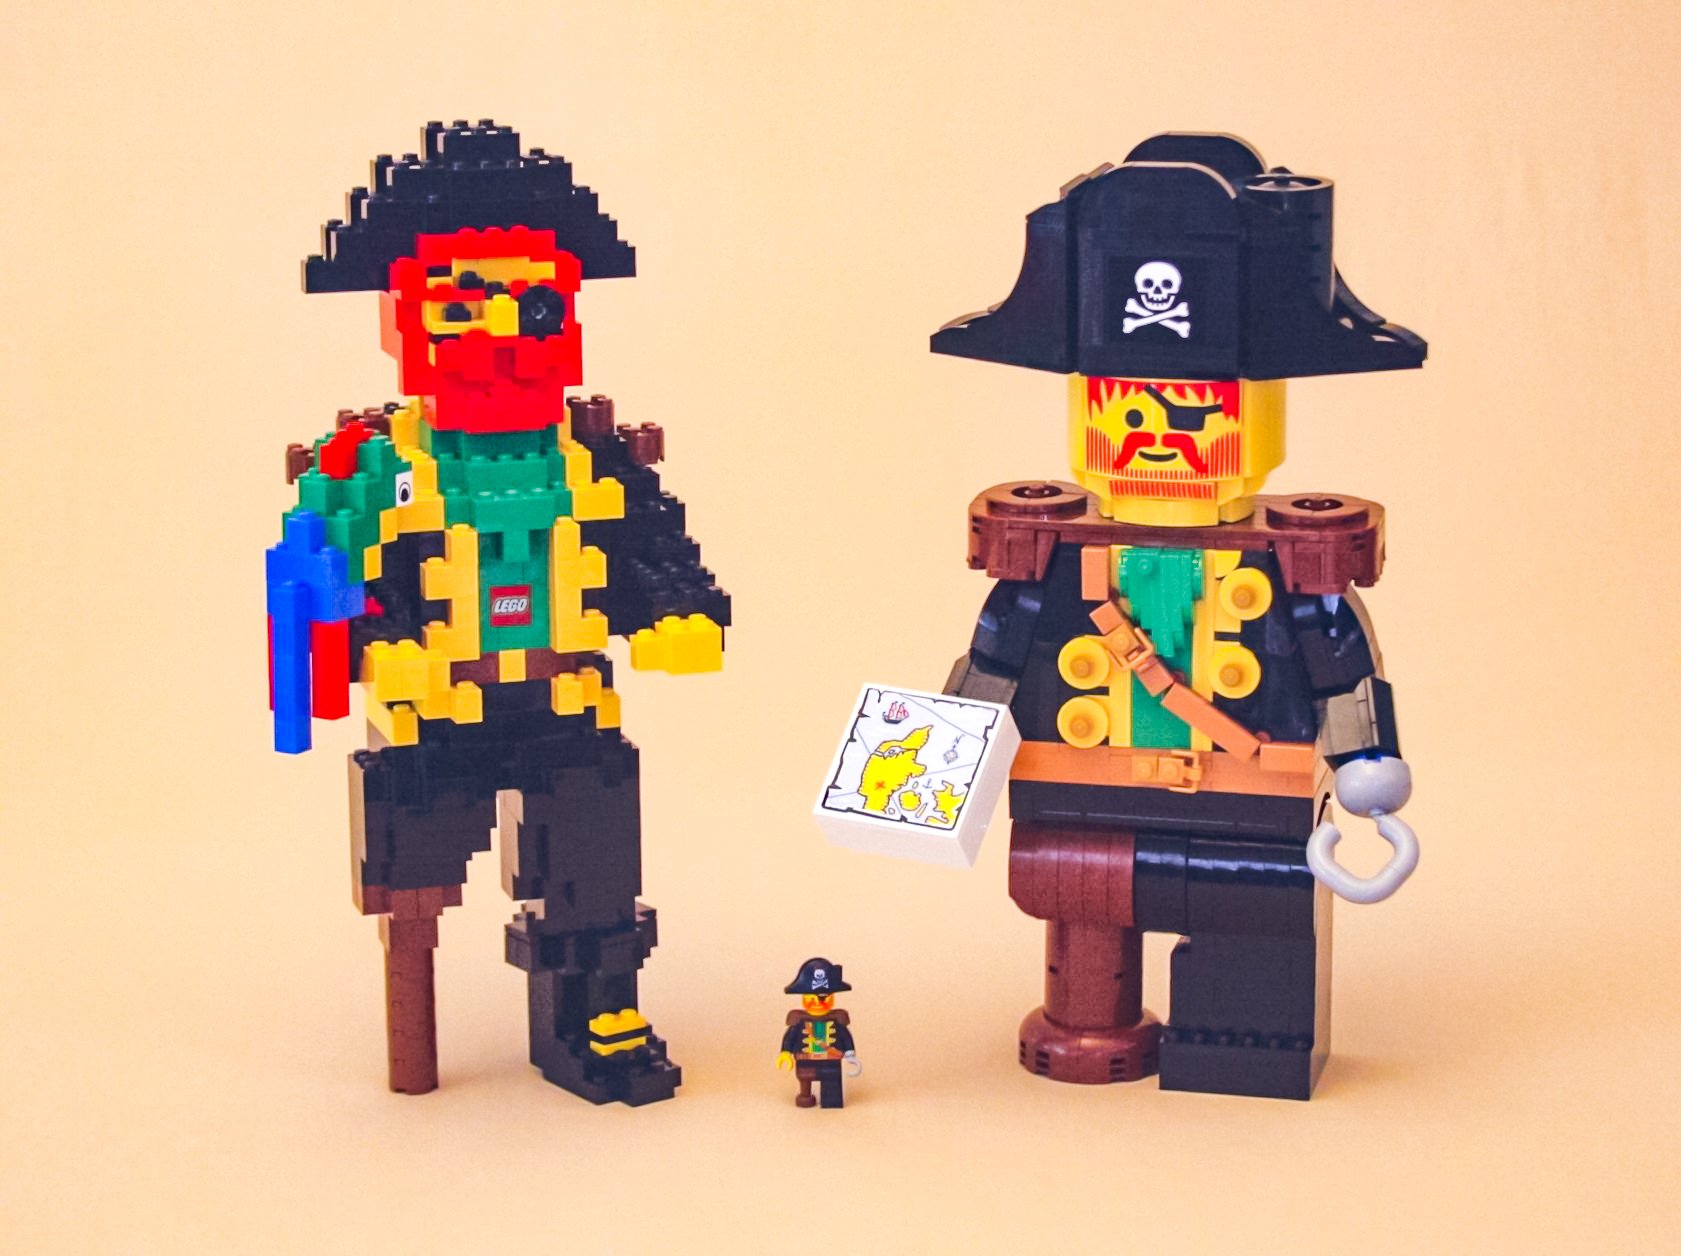 Brick Built Scaling a Beloved Classic BrickNerd - All things and the LEGO fan community